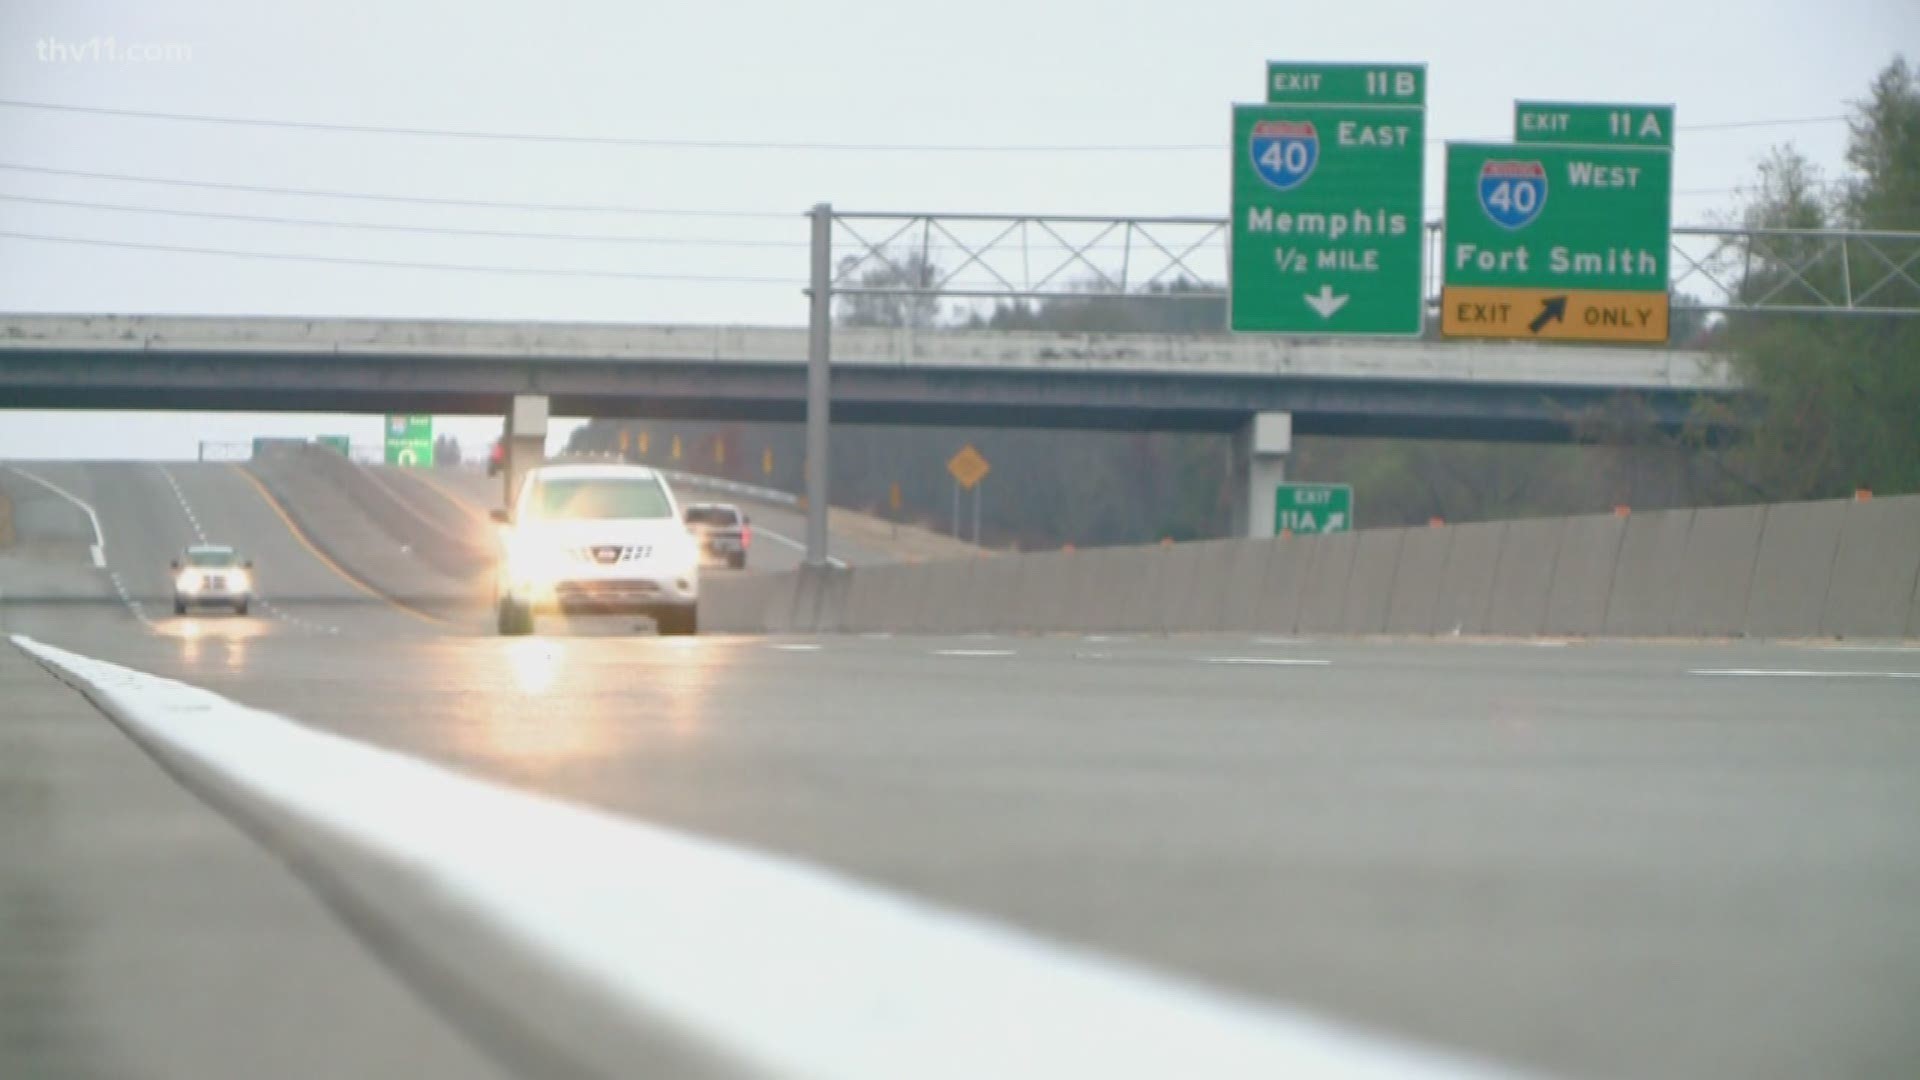 A recent study by "Safewise" ranked Arkansas as the most dangerous state in the nation to drive in during the rain.